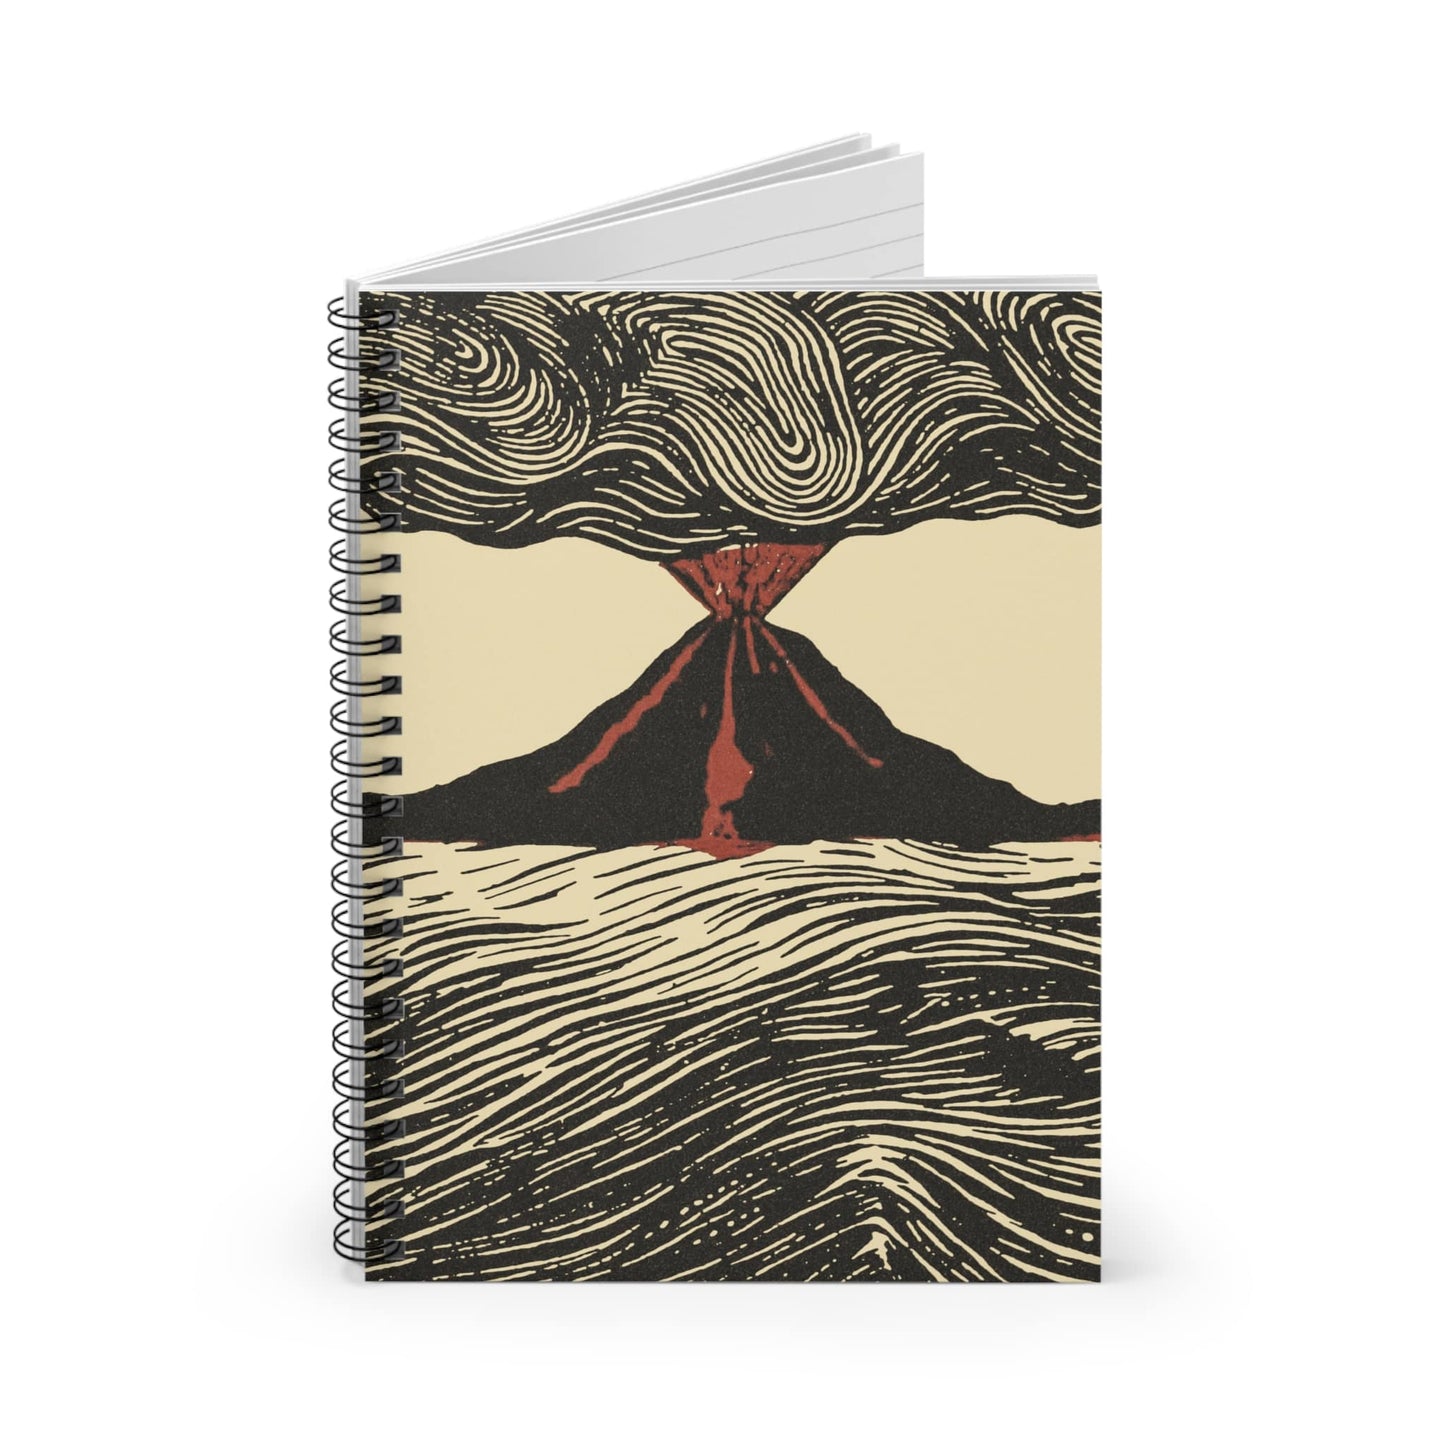 Cool Volcano Drawing Spiral Notebook Standing up on White Desk